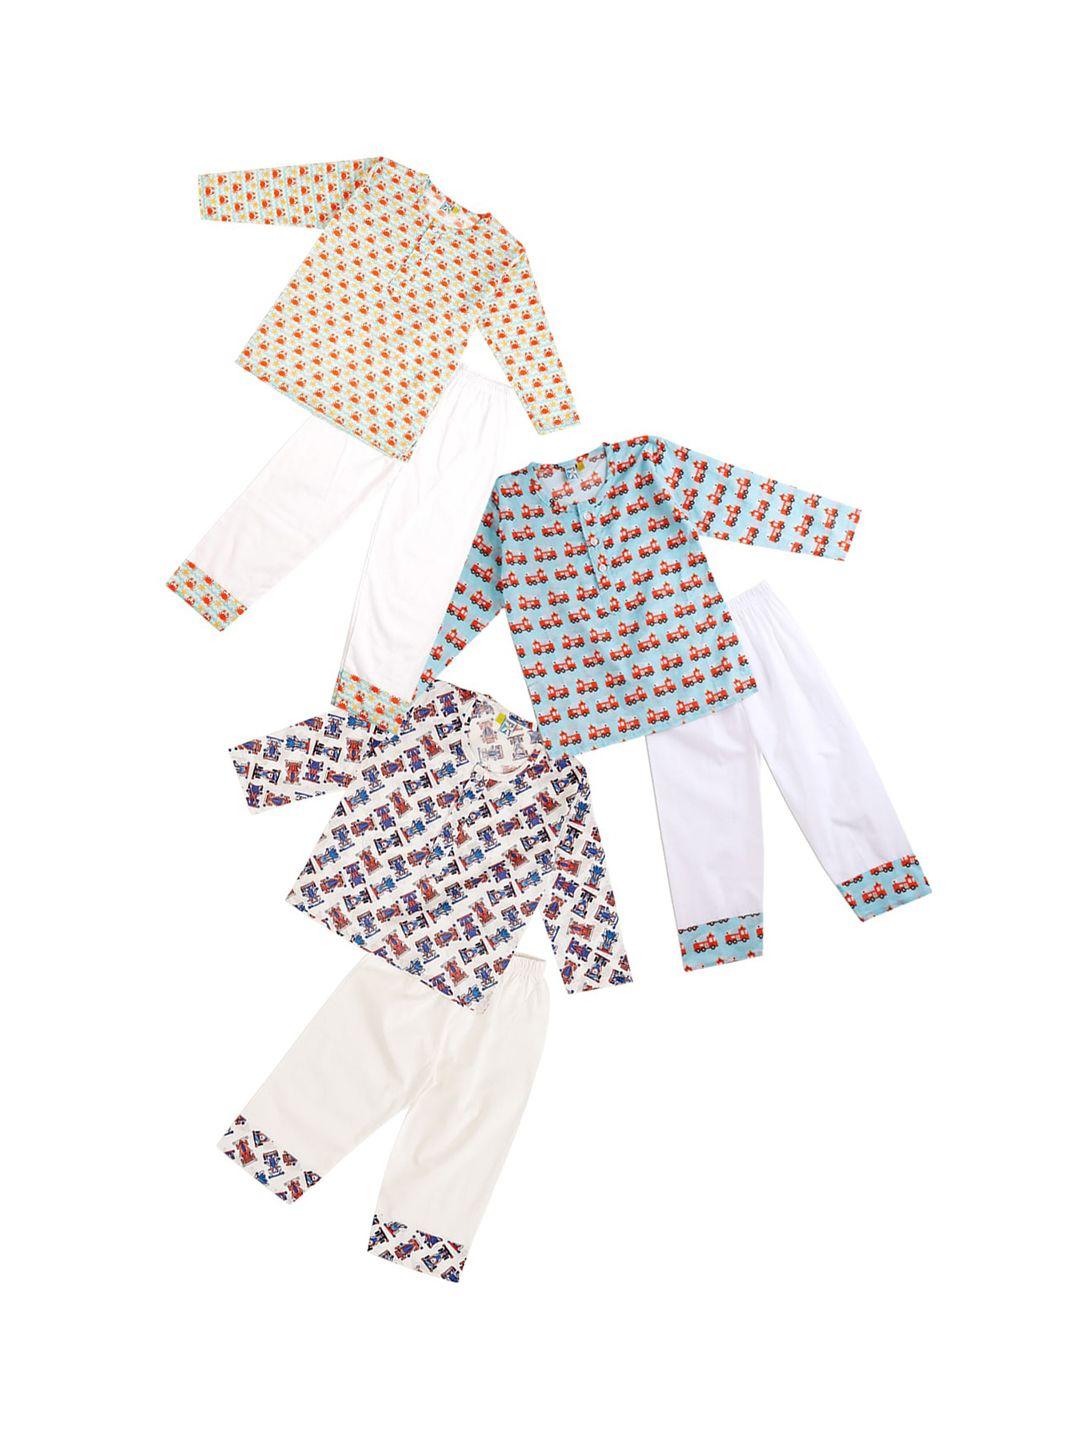 frangipani boys pack of 3 white & blue printed pure cotton night suit